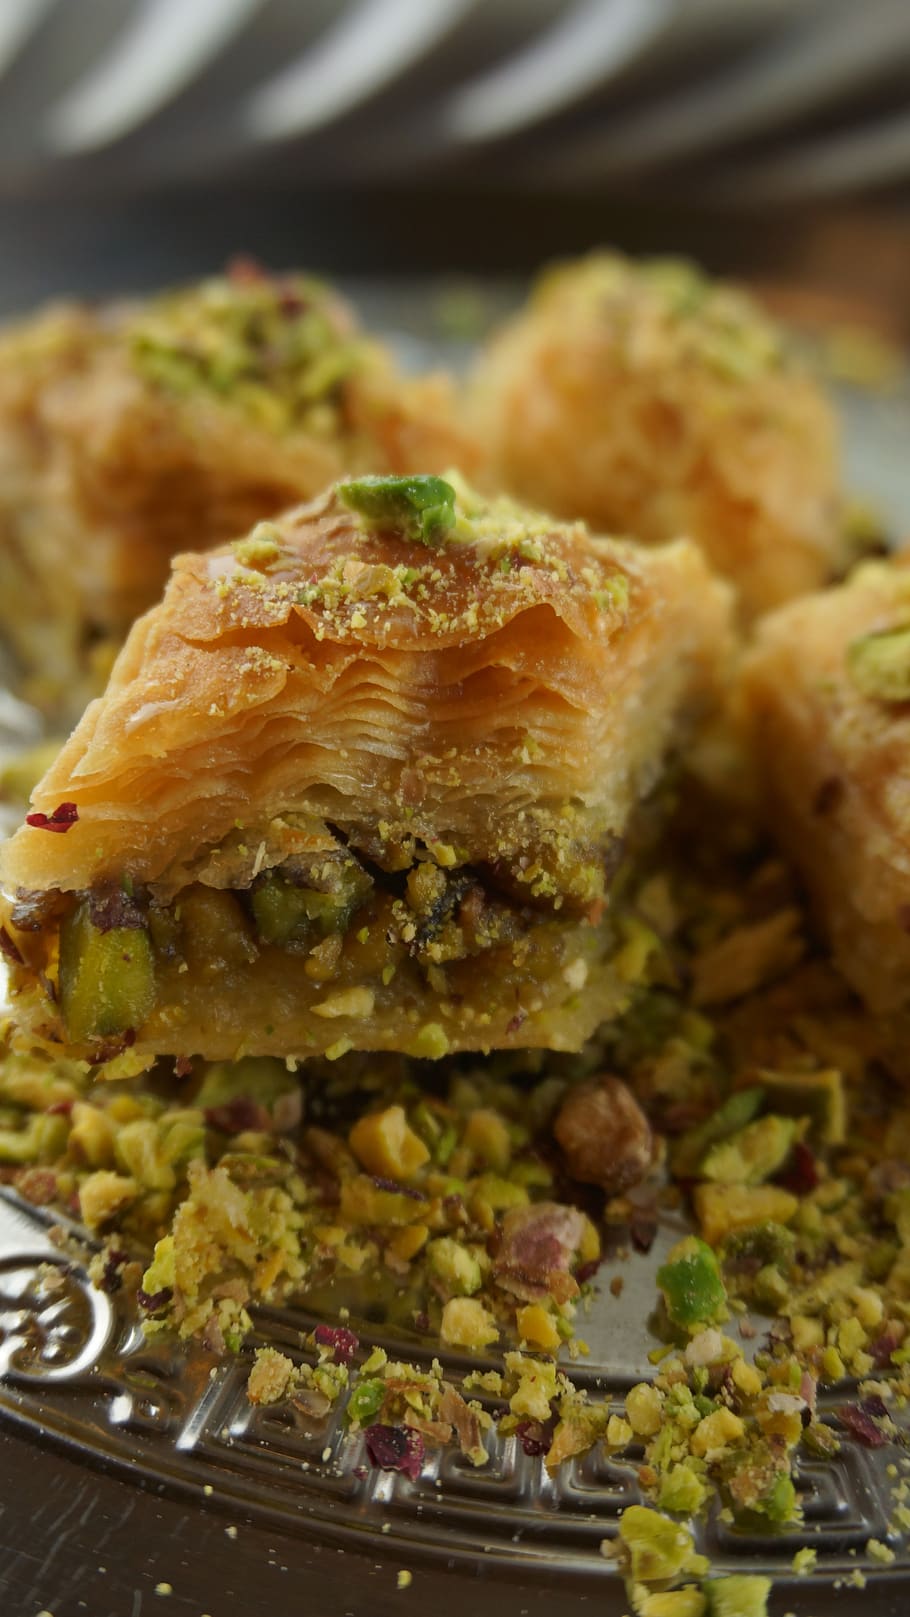 baklava-pastries, oriental kitchen, sweet pastries, food and drink, HD wallpaper